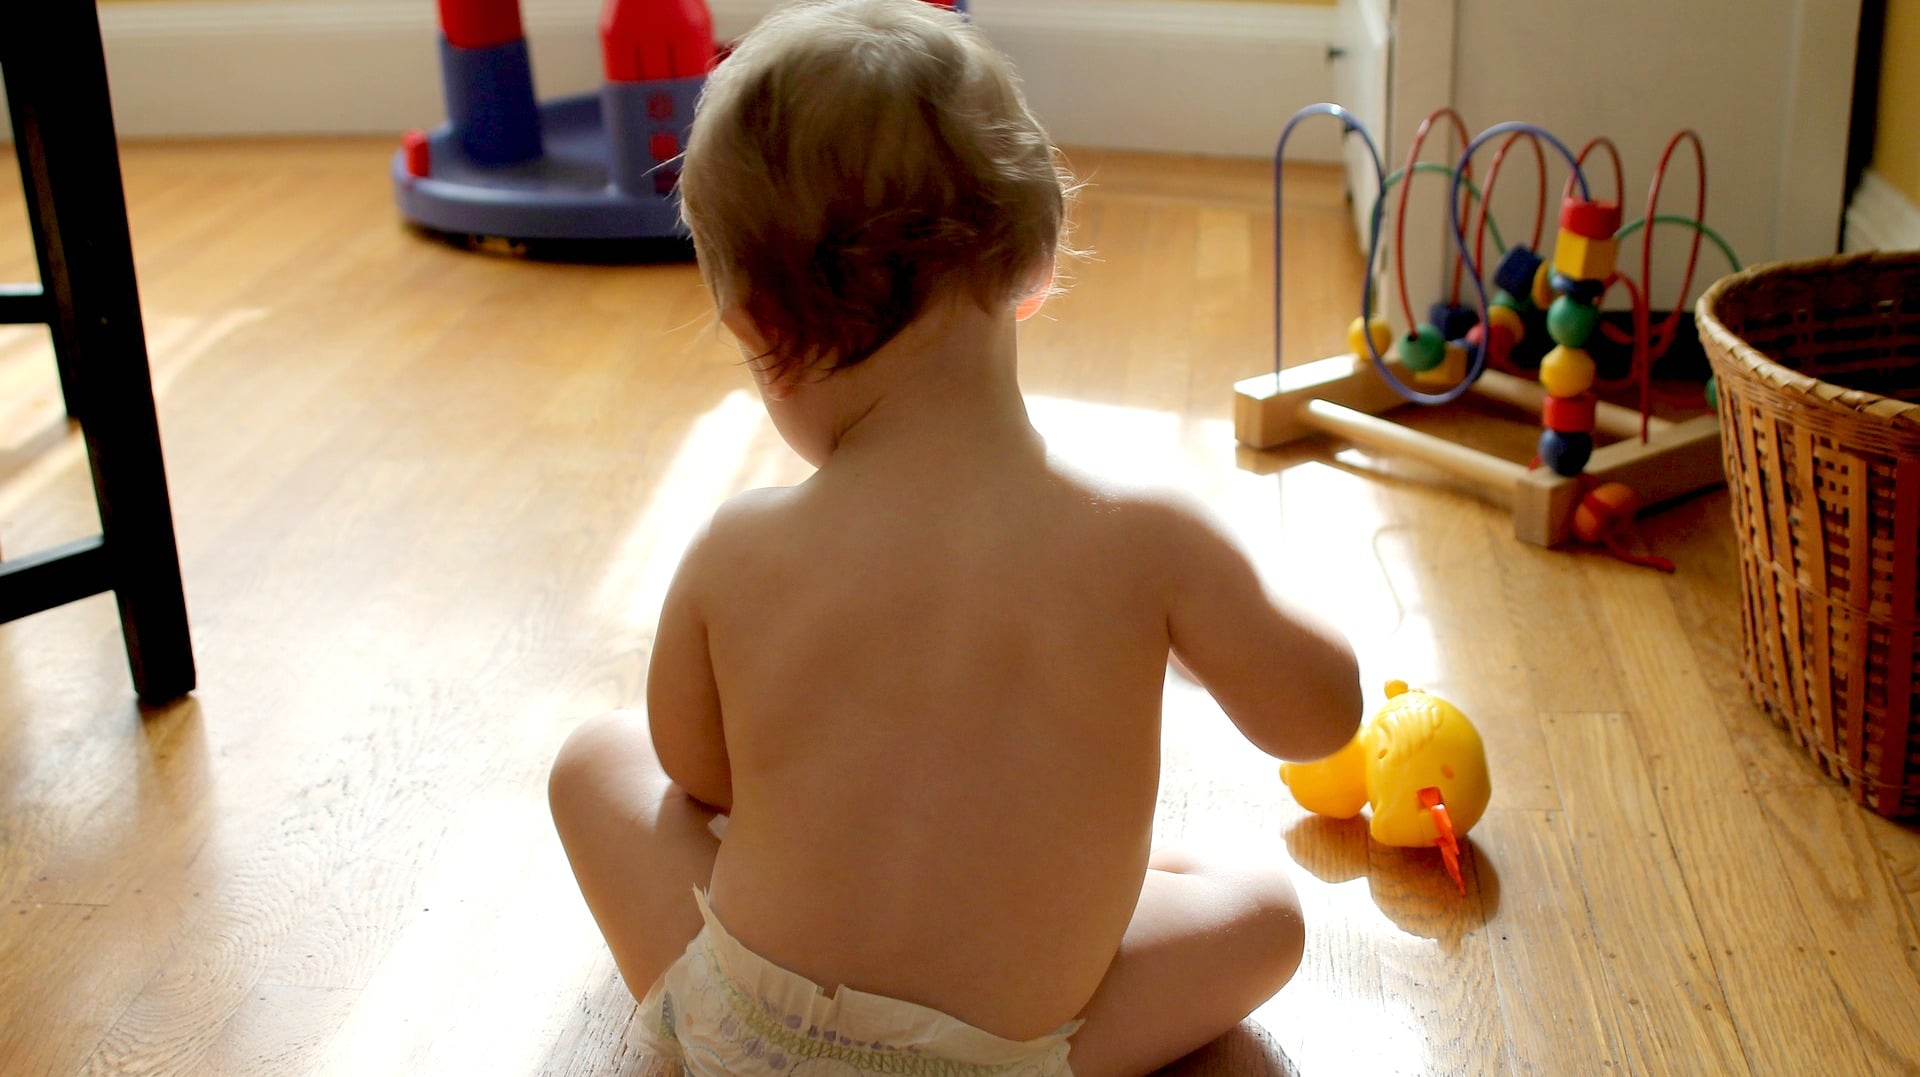 These Not-So-Obvious Products May Be A Danger To Your Child